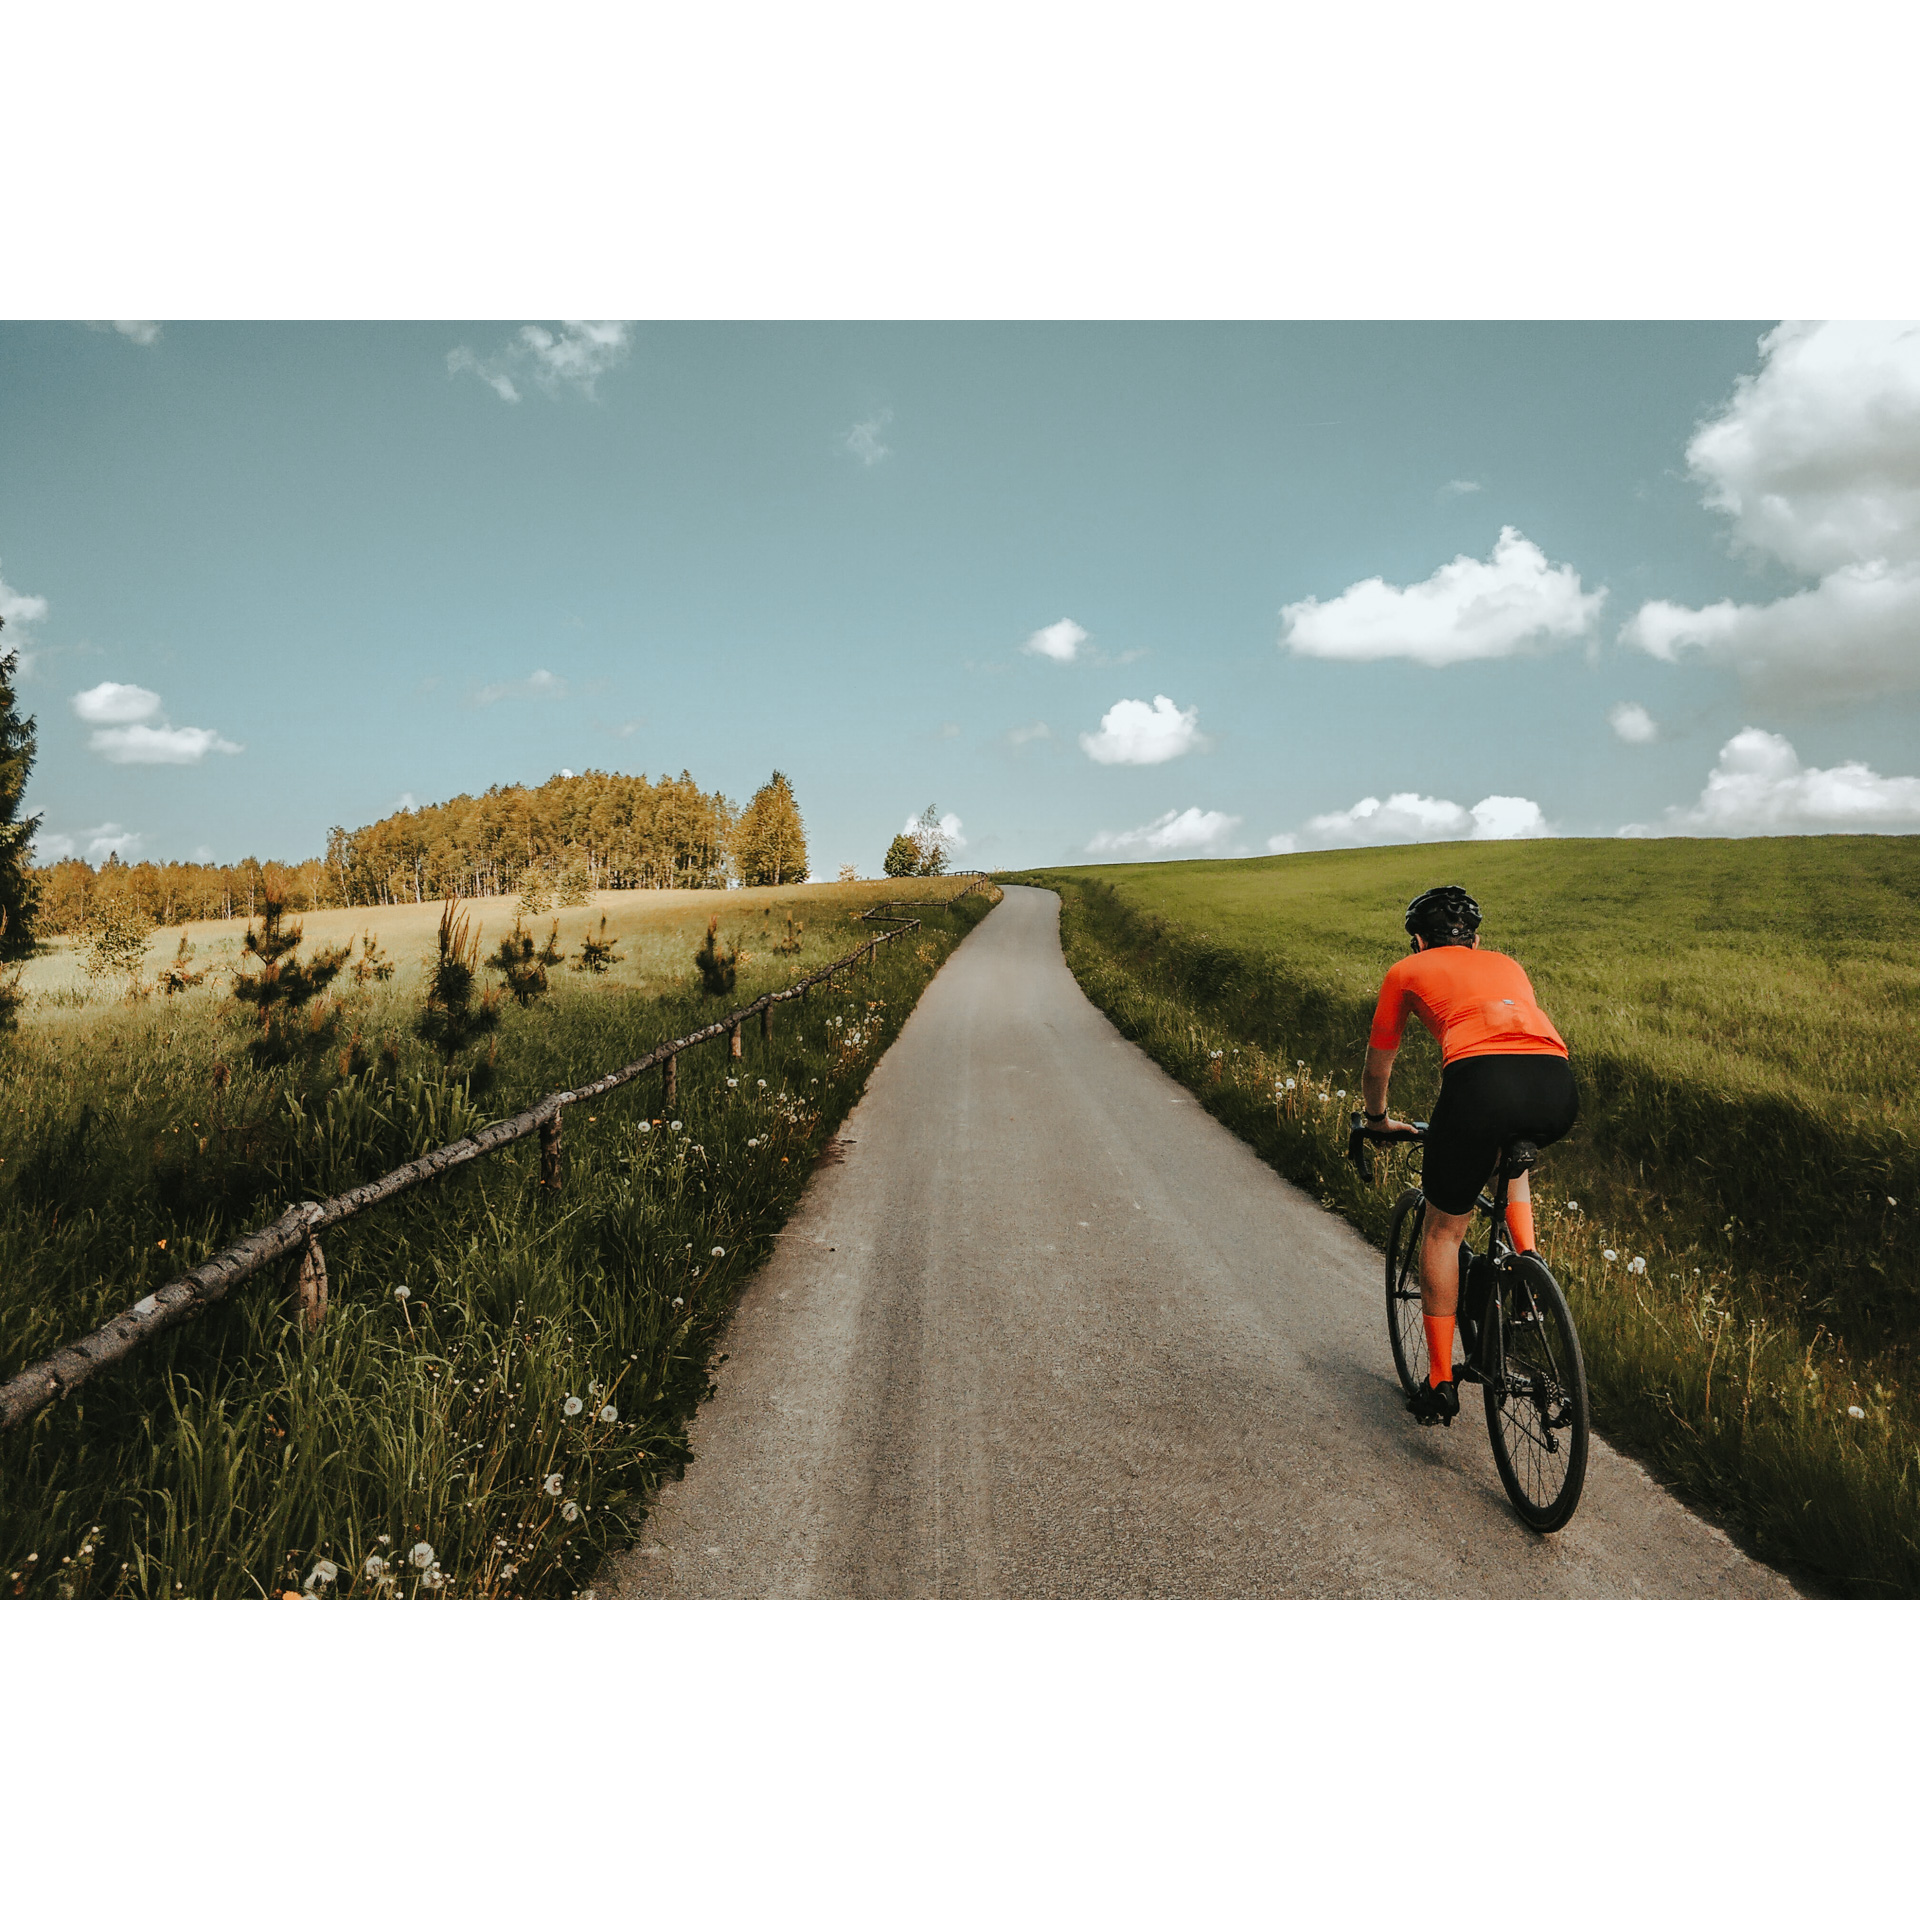 A cyclist in orange riding on a gravel road between tall grass separated by a fence on the left side